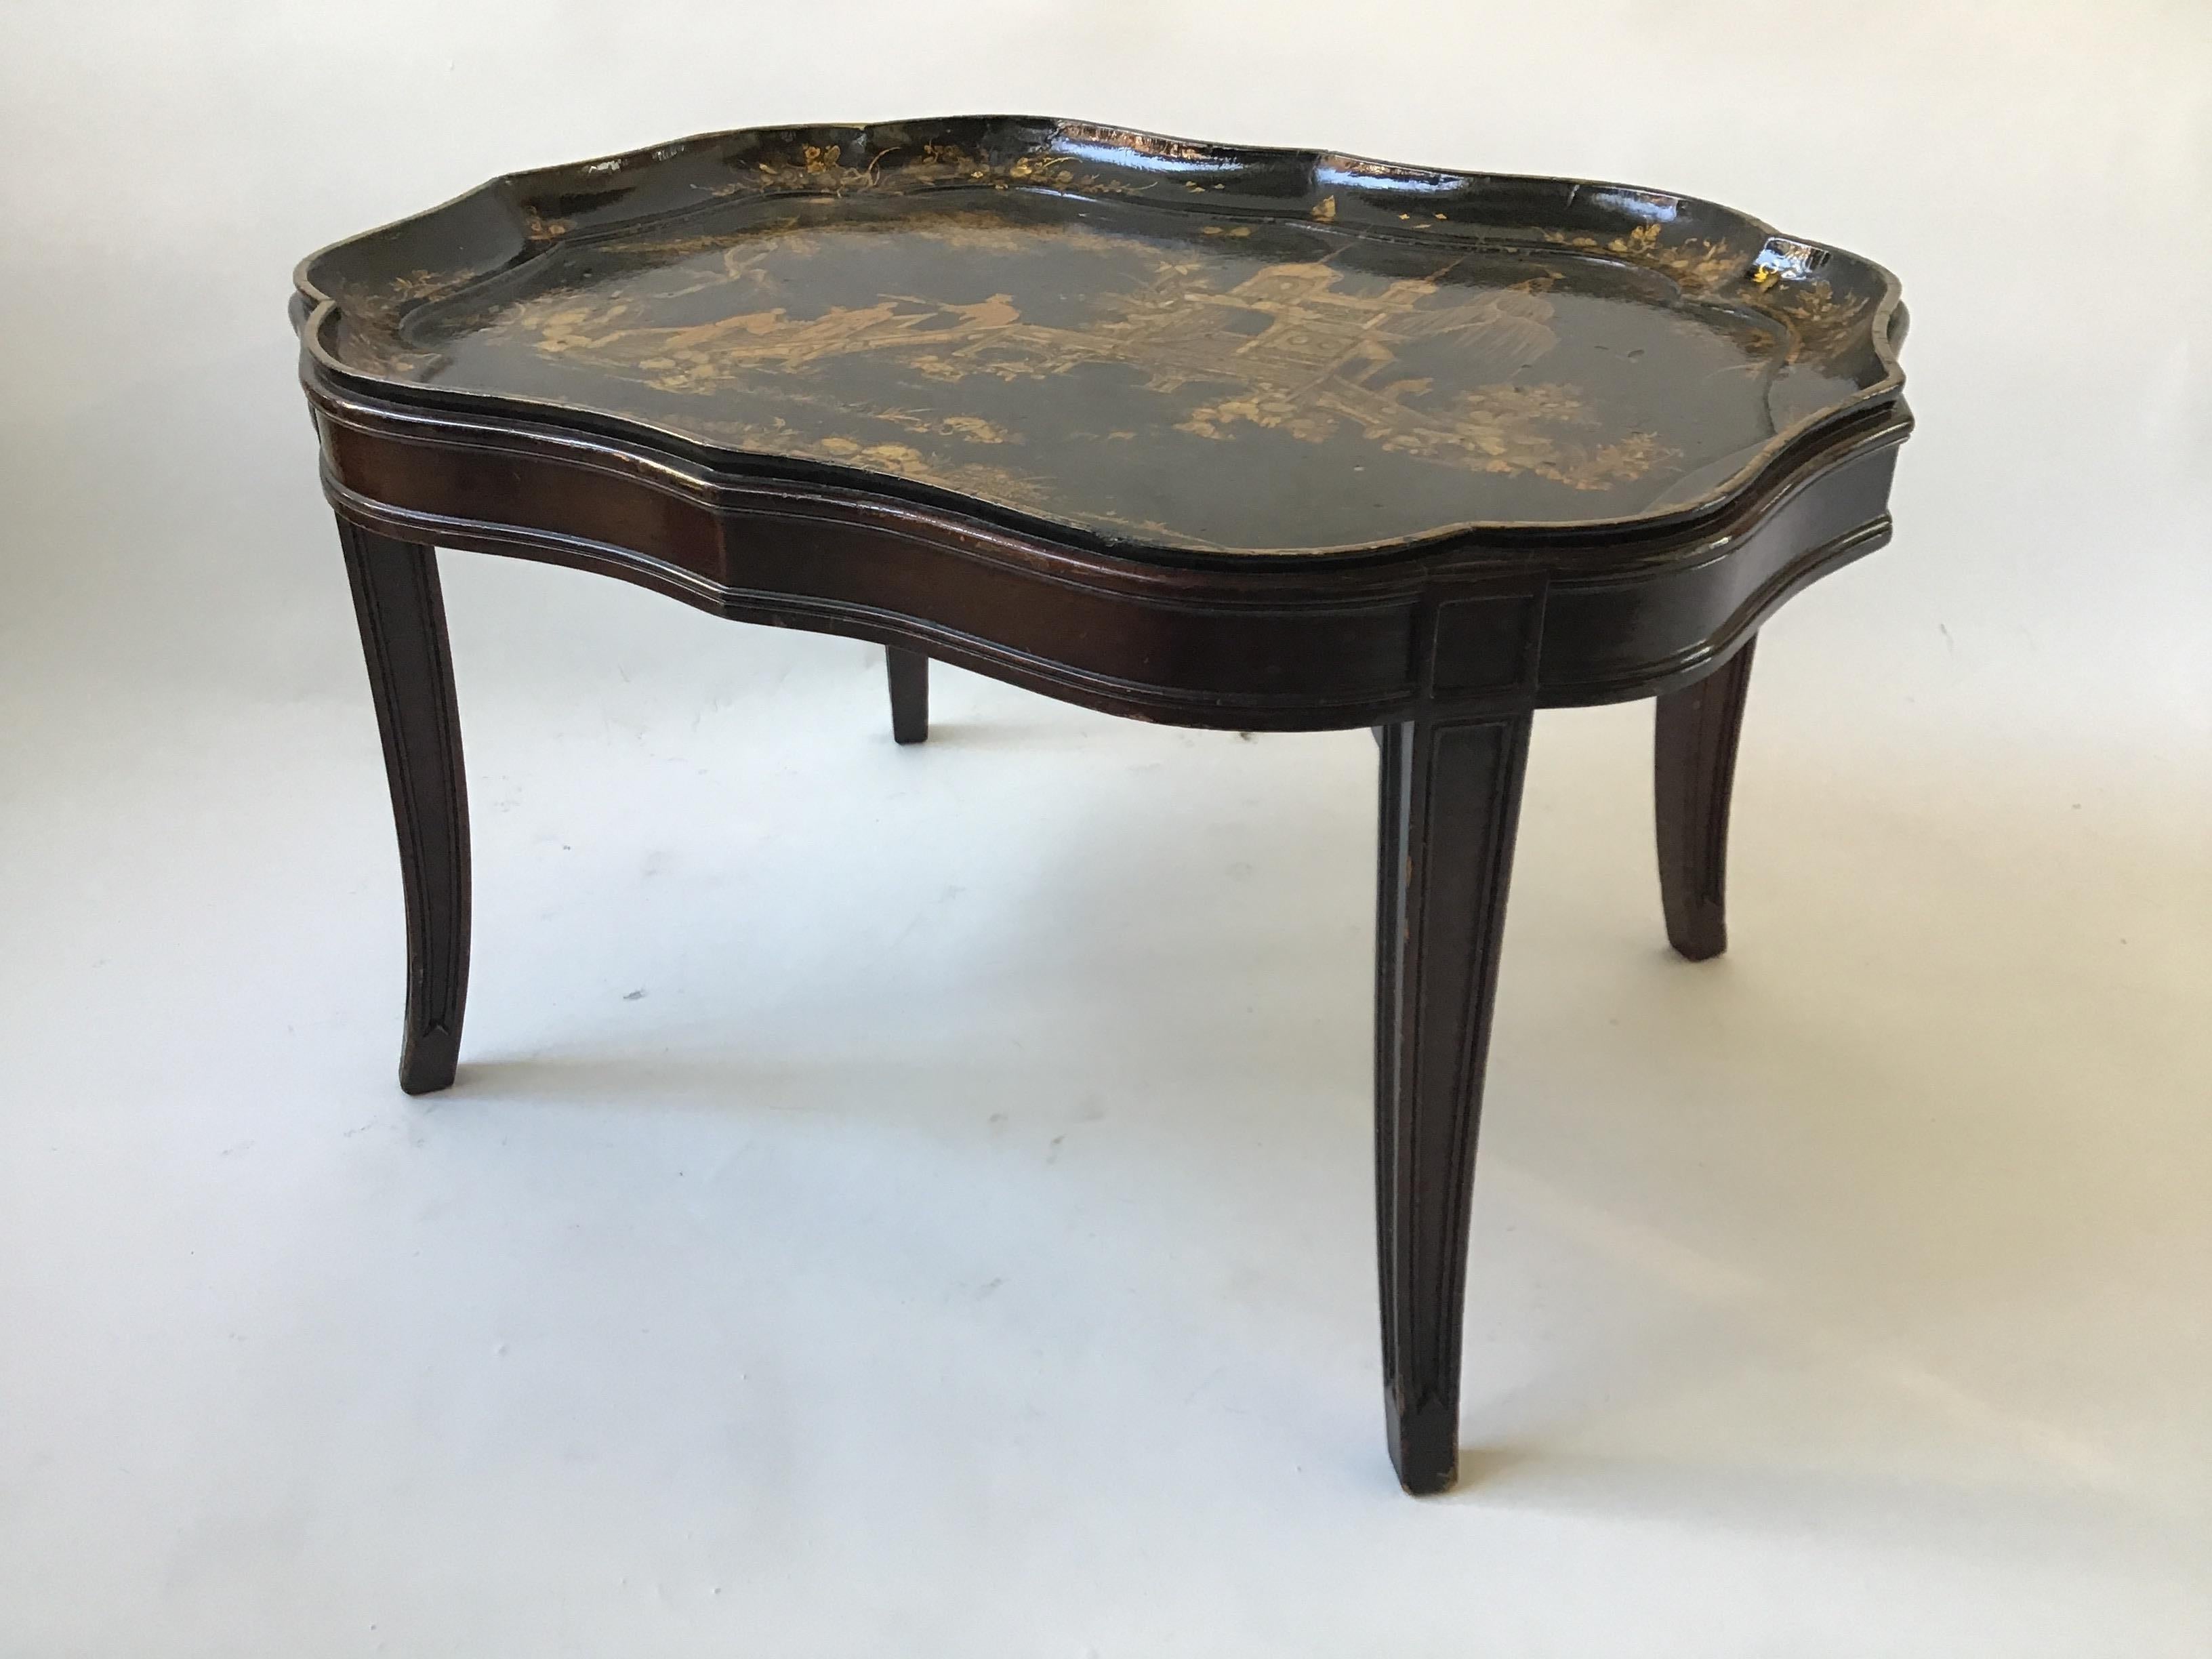 1880s English Chinoiserie Paper Mache Tray Table 2